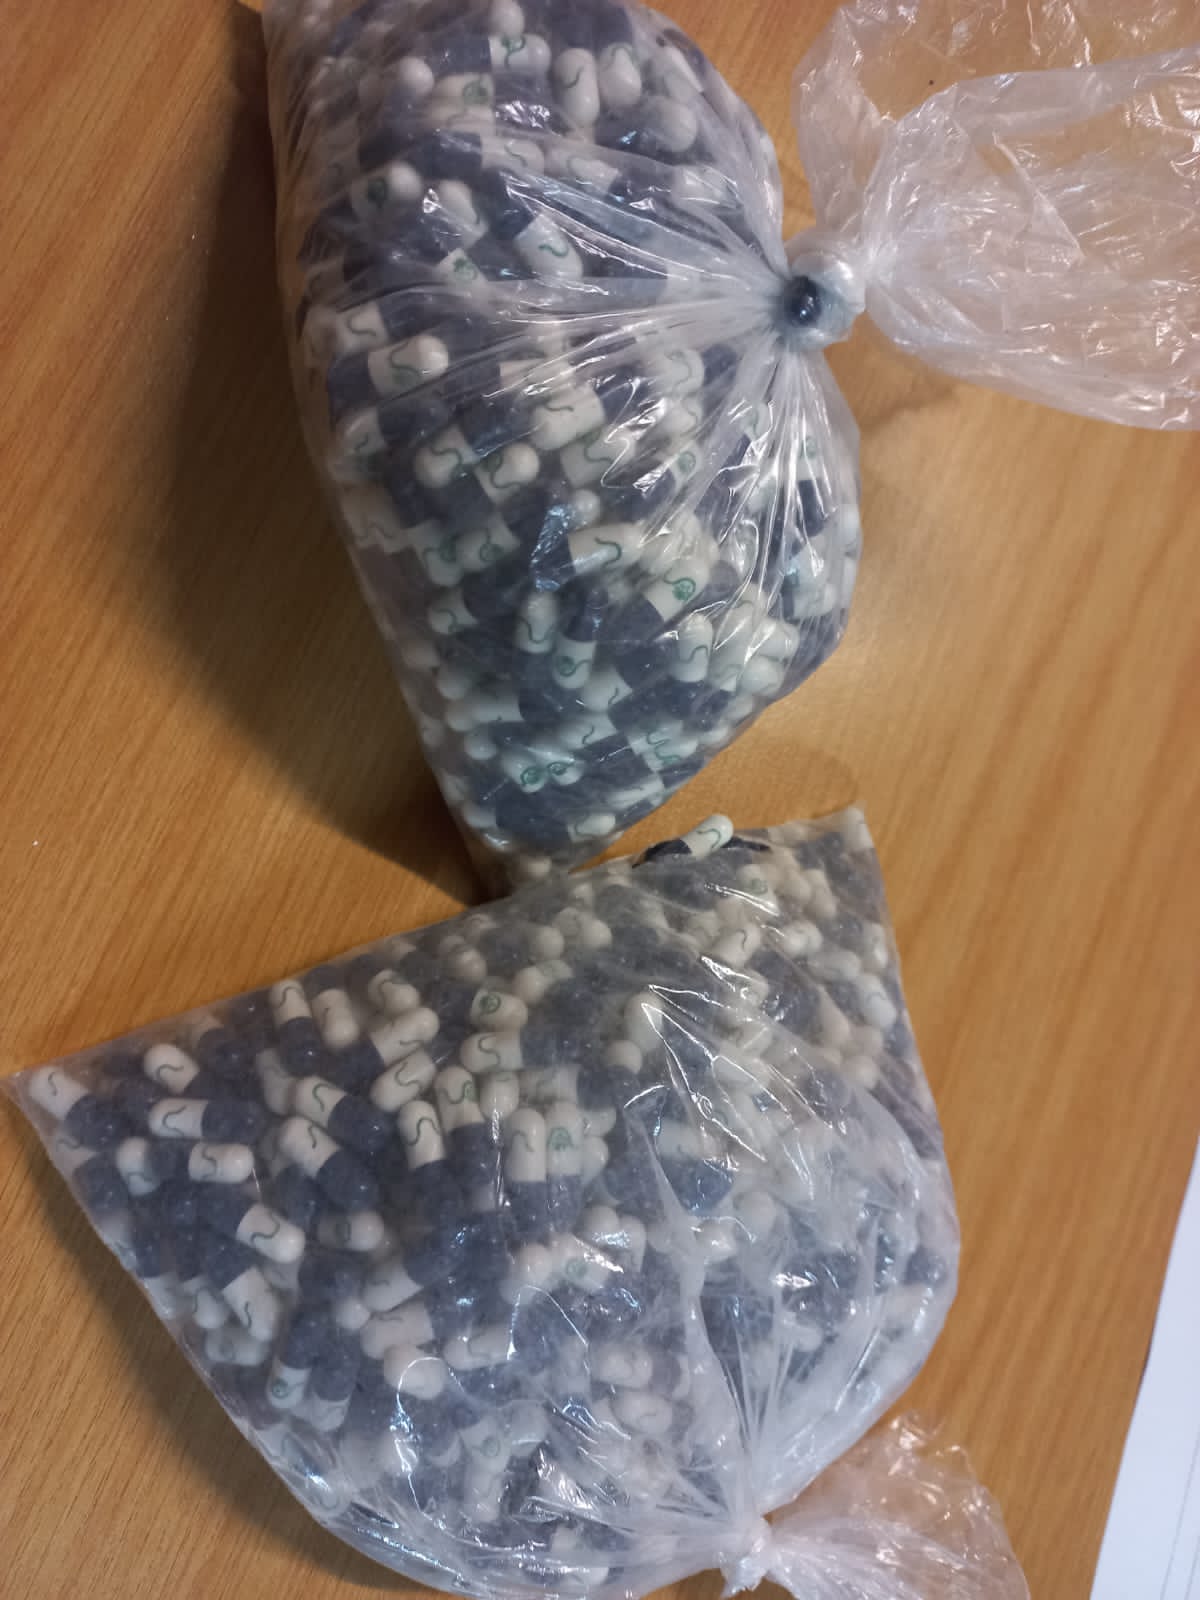 Two suspects to appear in court for dealing in drugs